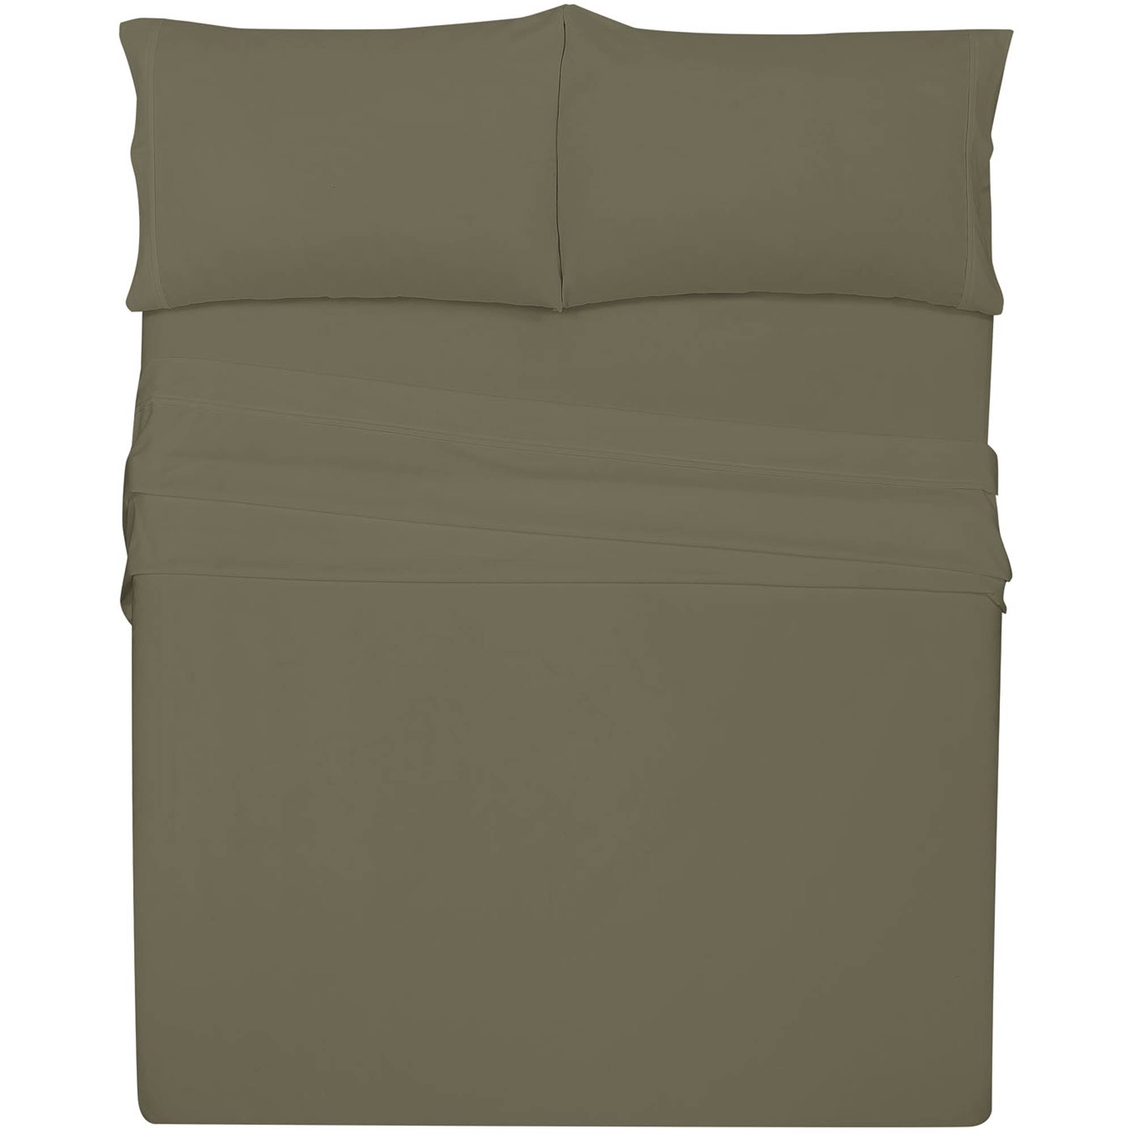 Royale Linens 400 Thread Count Performance Sheet Set - Image 3 of 4